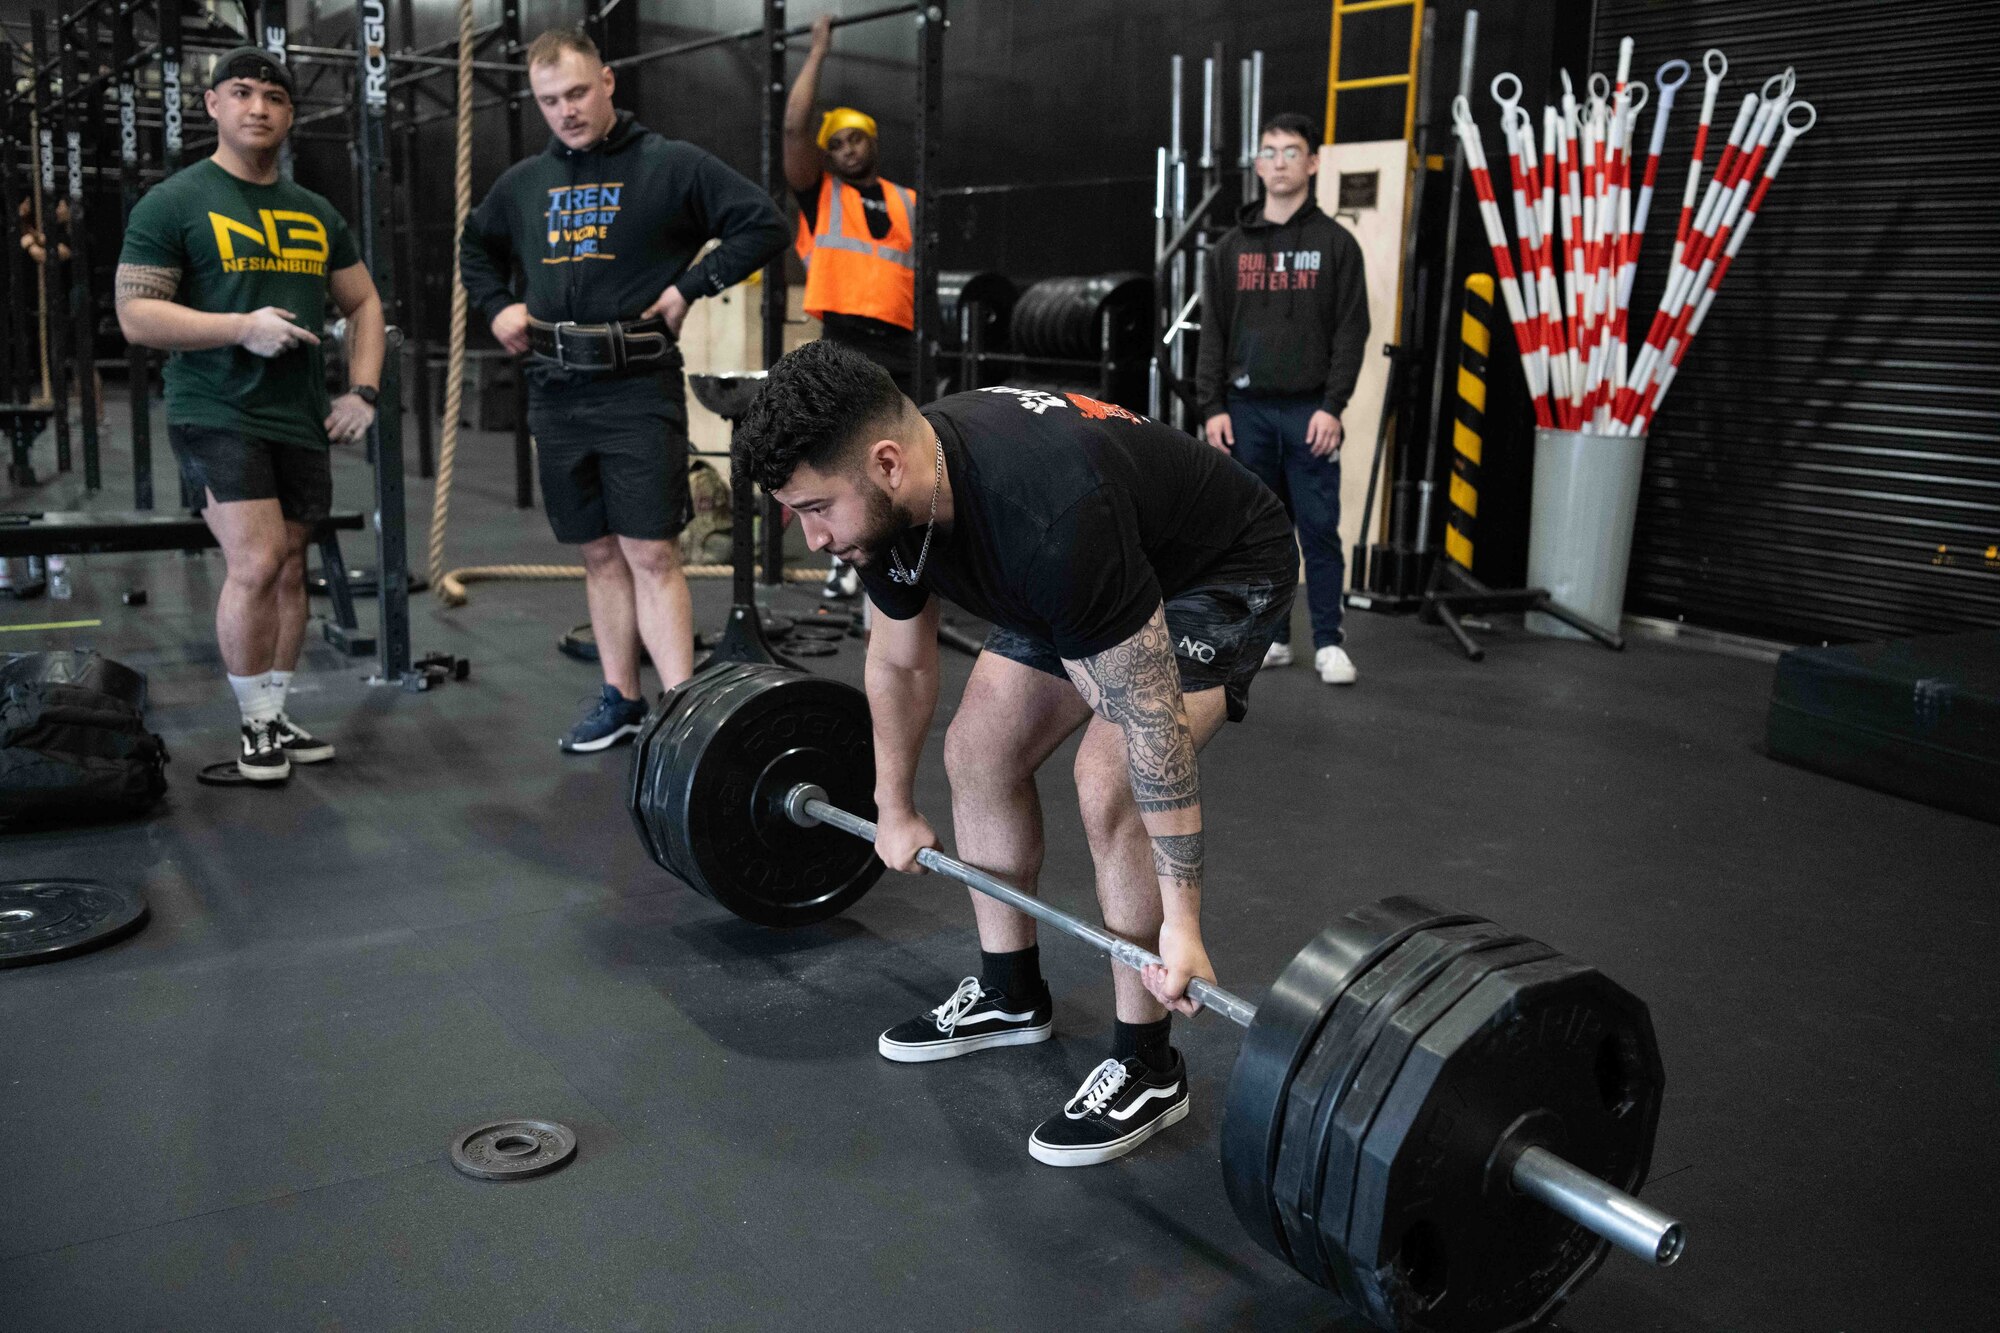 Participant prepares to deadlift a barbell during a power lifting competition.